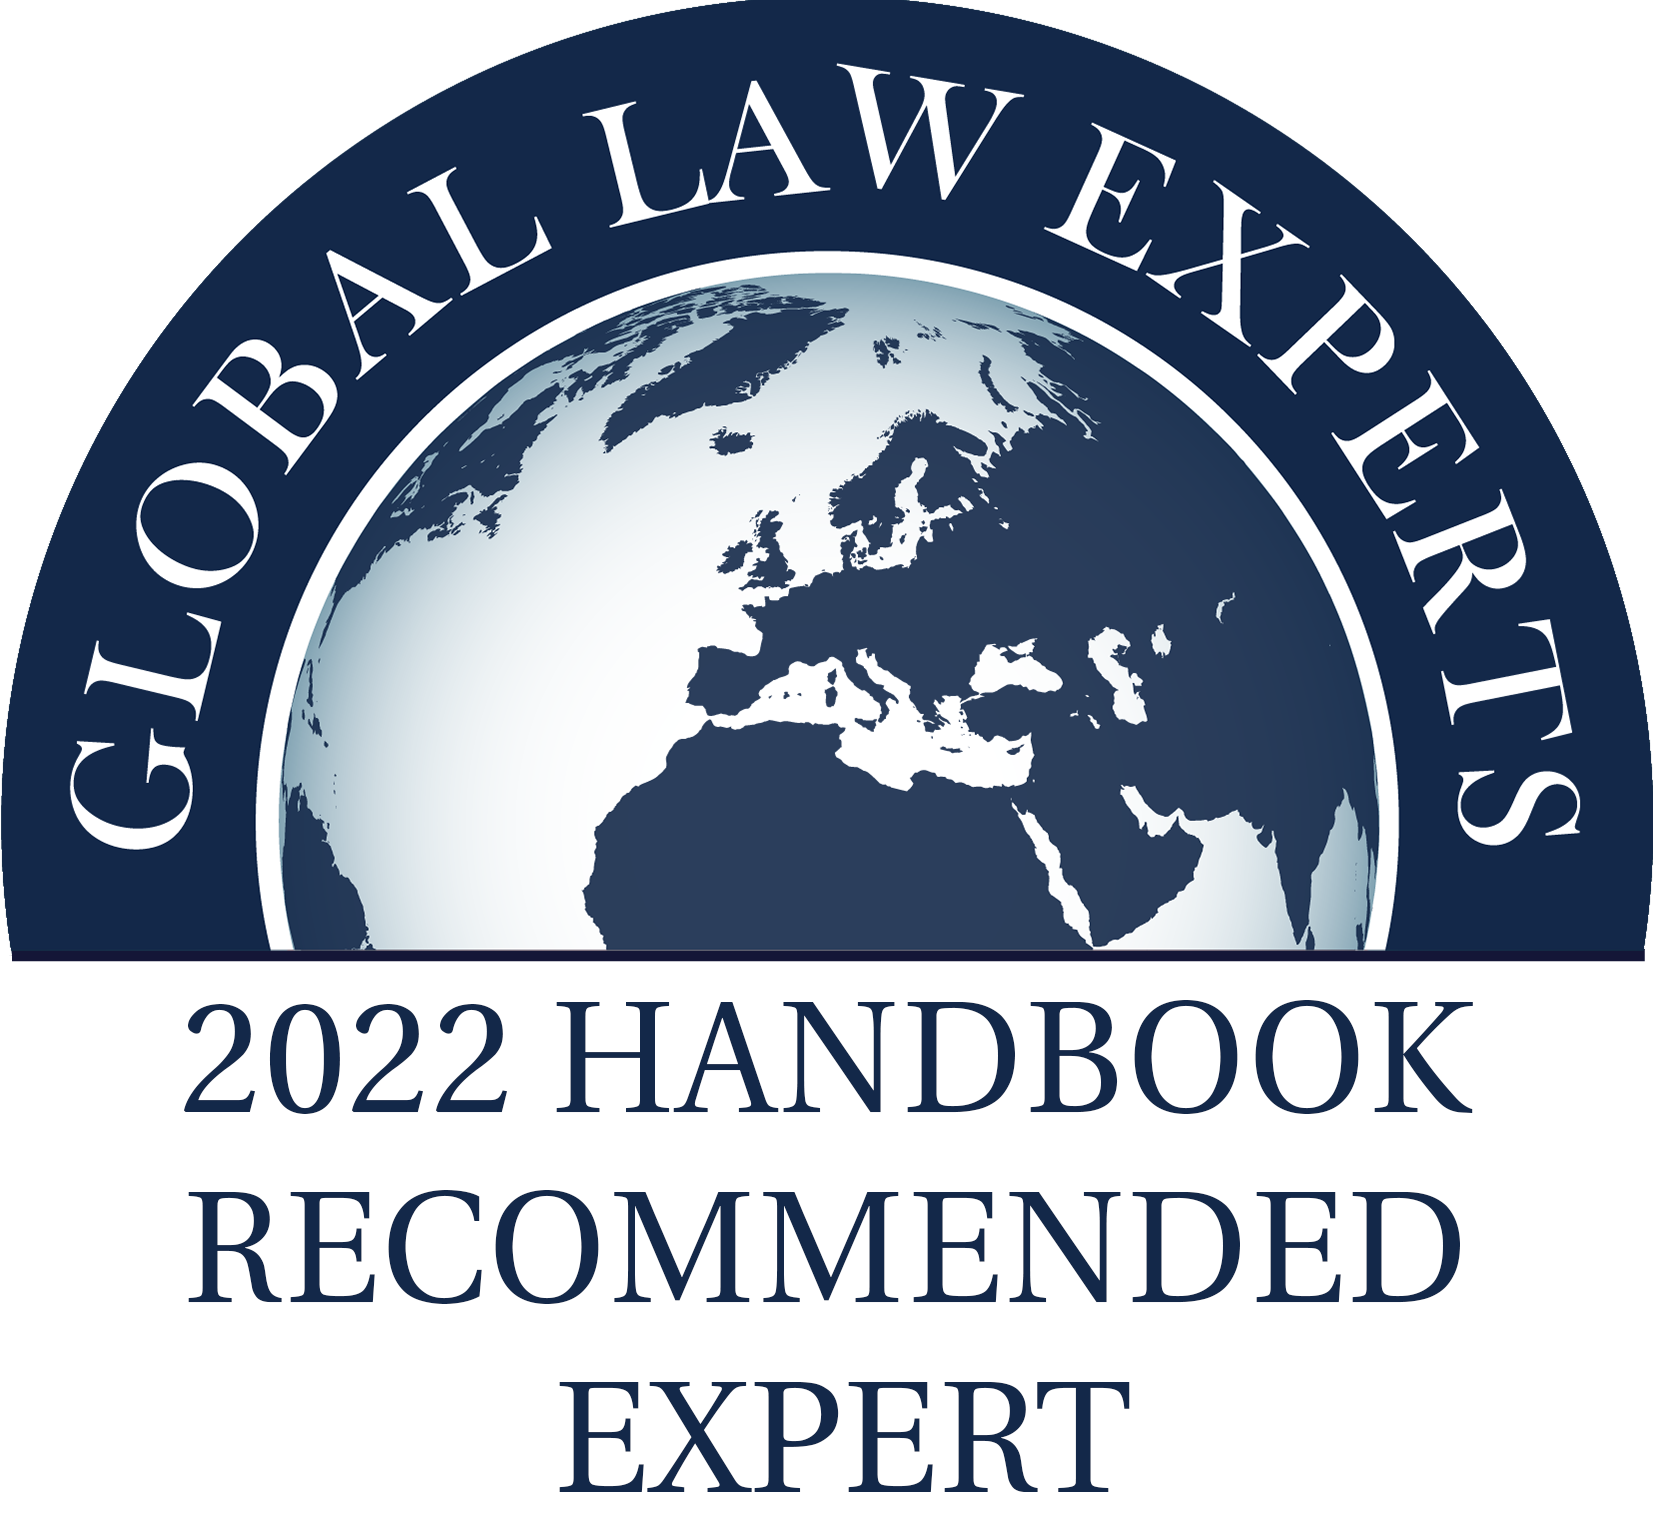 Global Law Experts - 2022 Handbook Recommended Expert